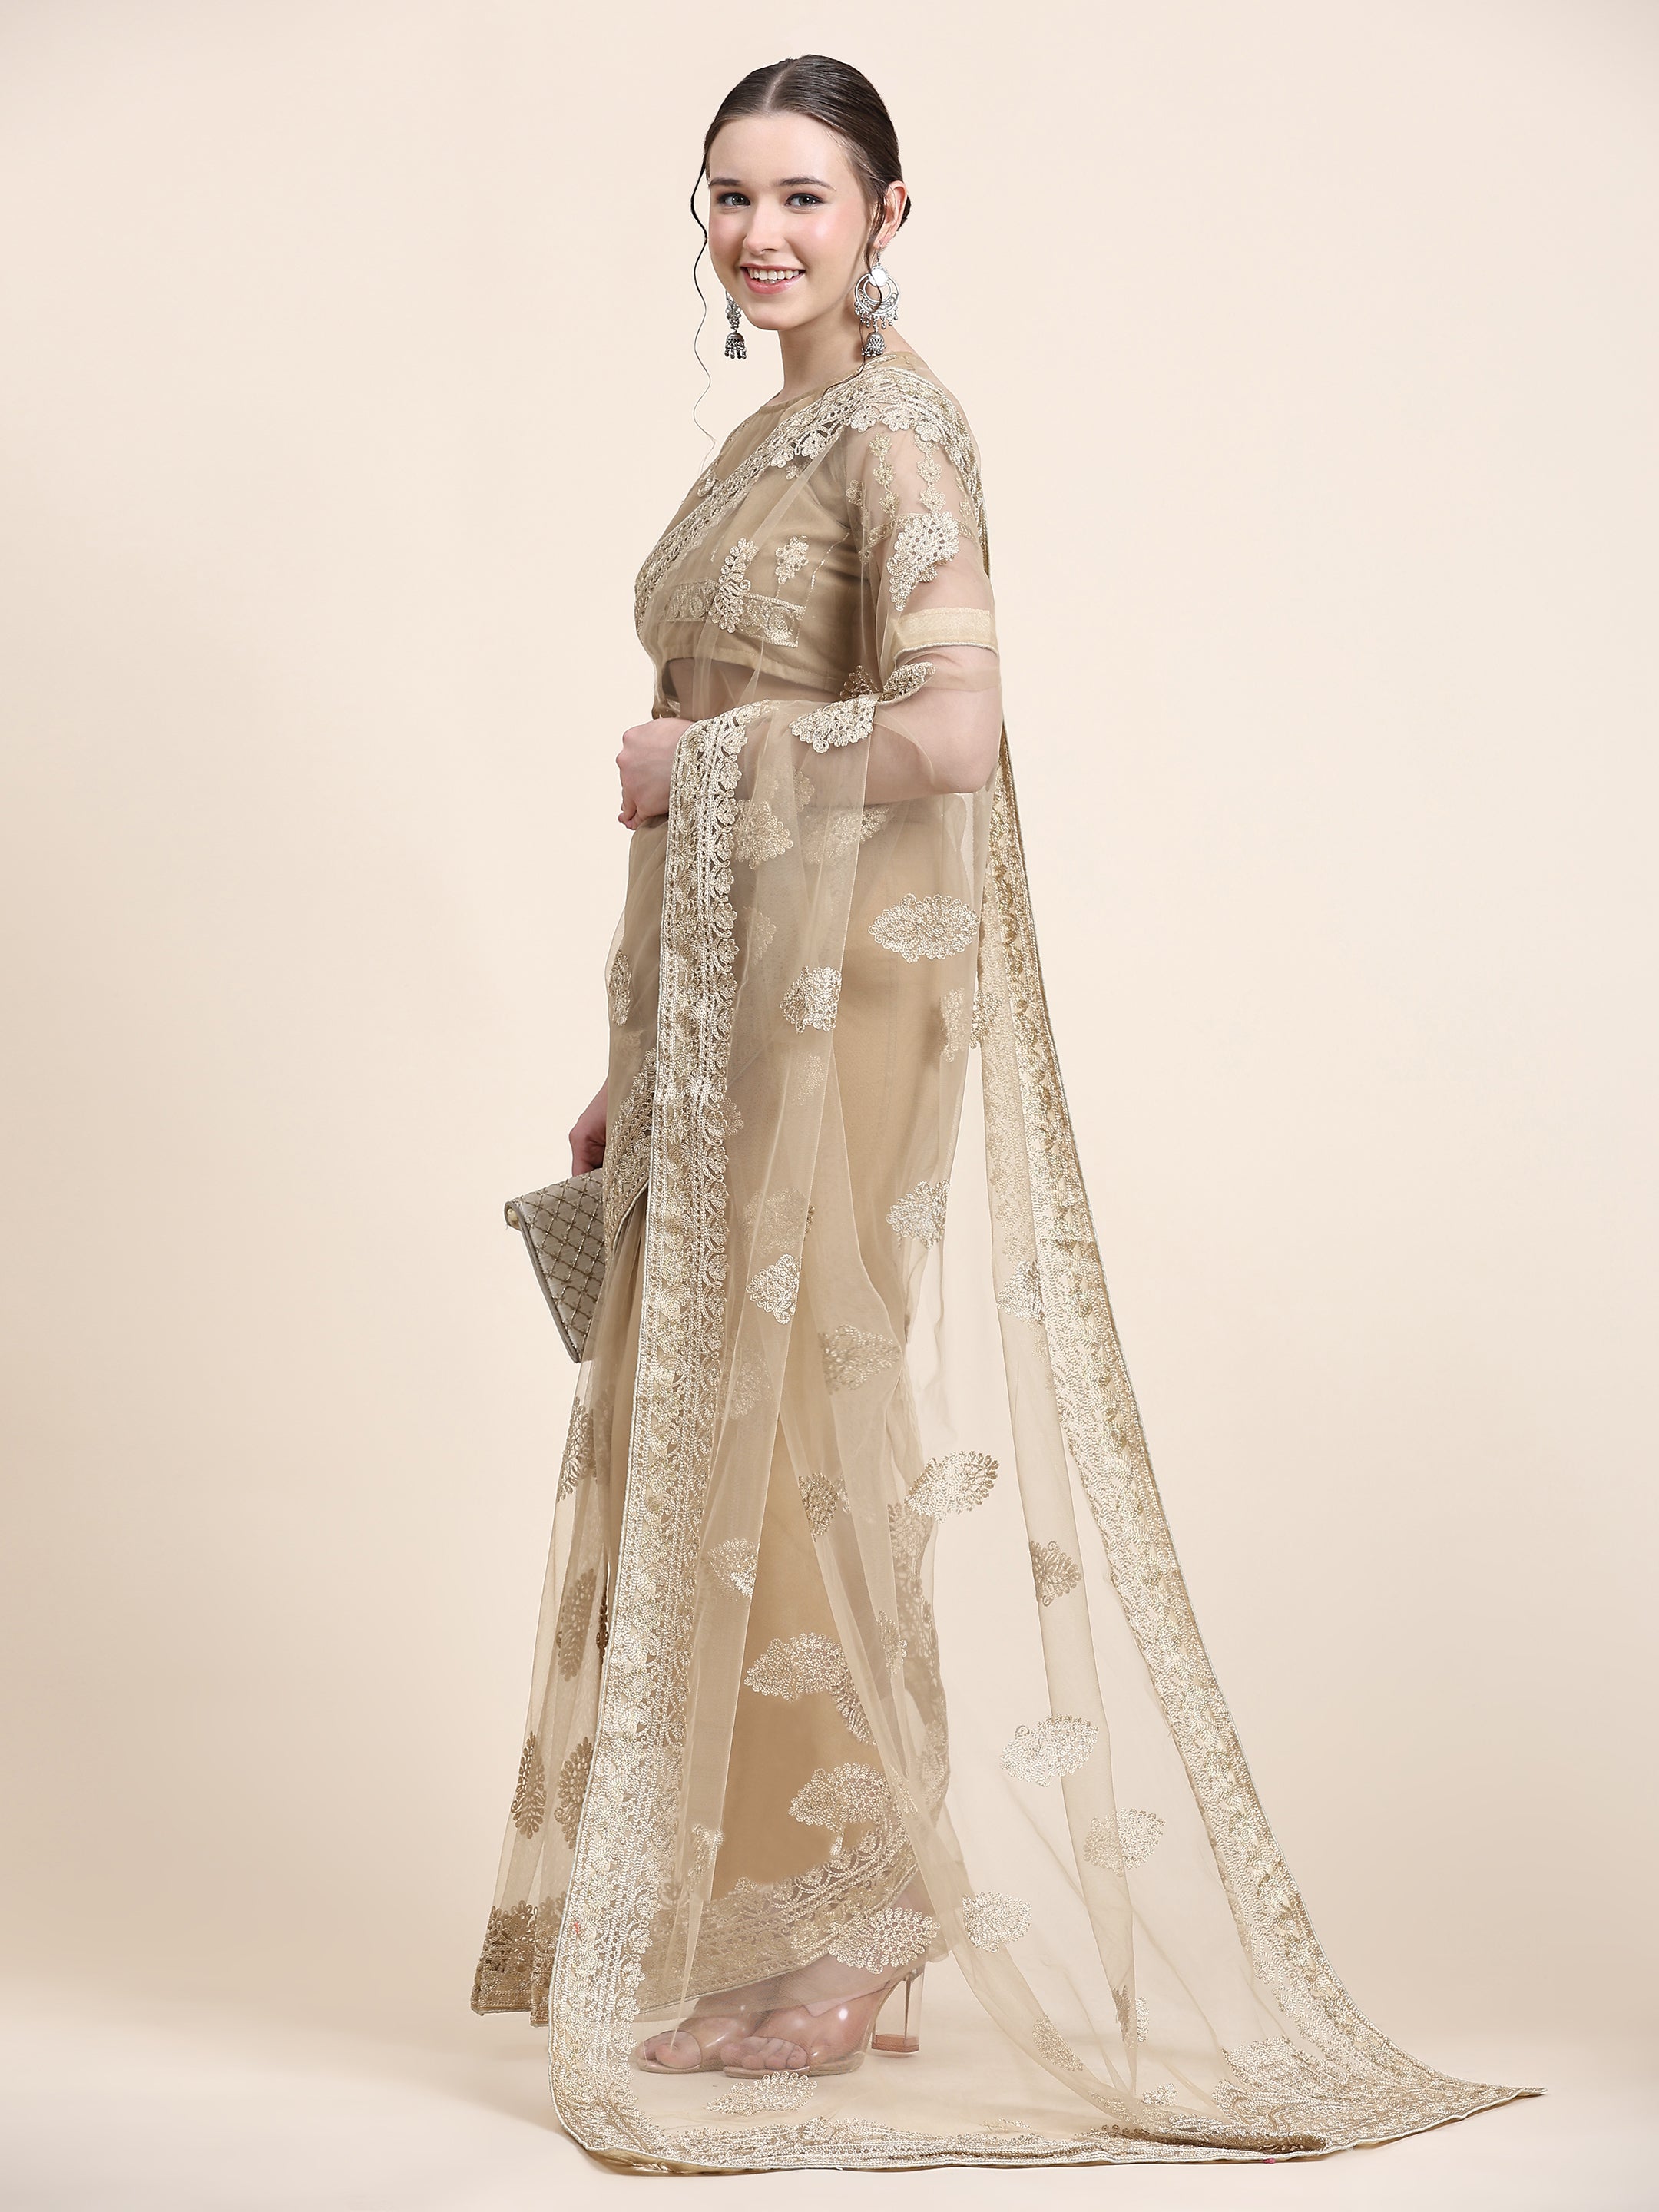 Women's Self Color Thread Embroidery Paty Wear Contemporary Net Saree With Blouse Piece (Beige) - NIMIDHYA